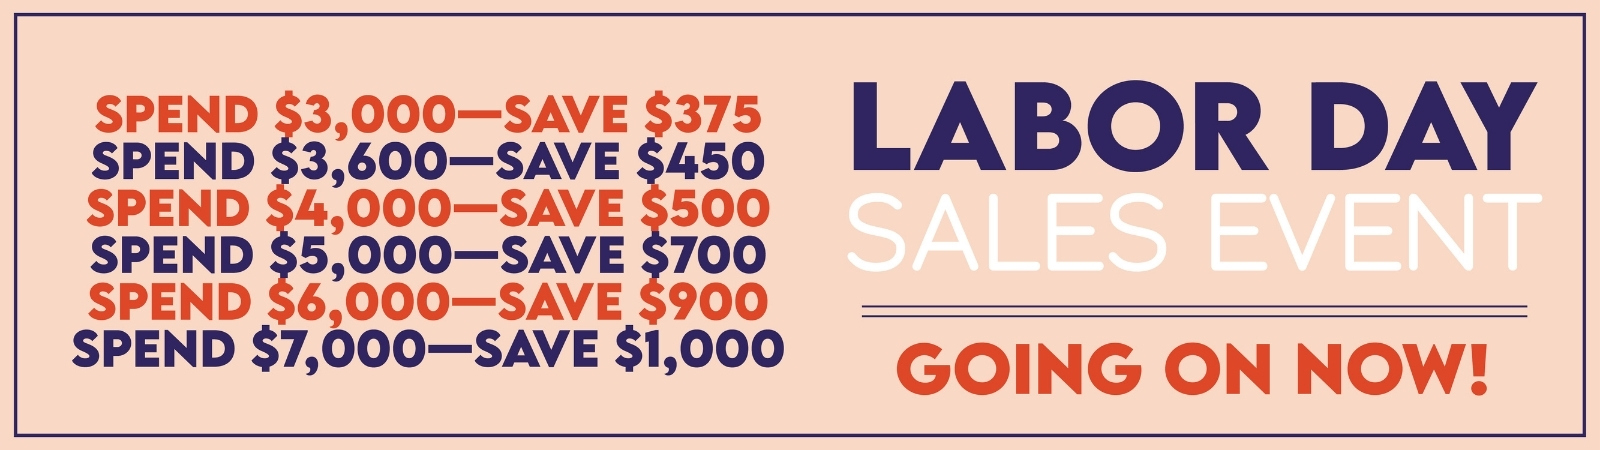 SAVE up to $1000 - Labor Day Sales Event - On NOW!